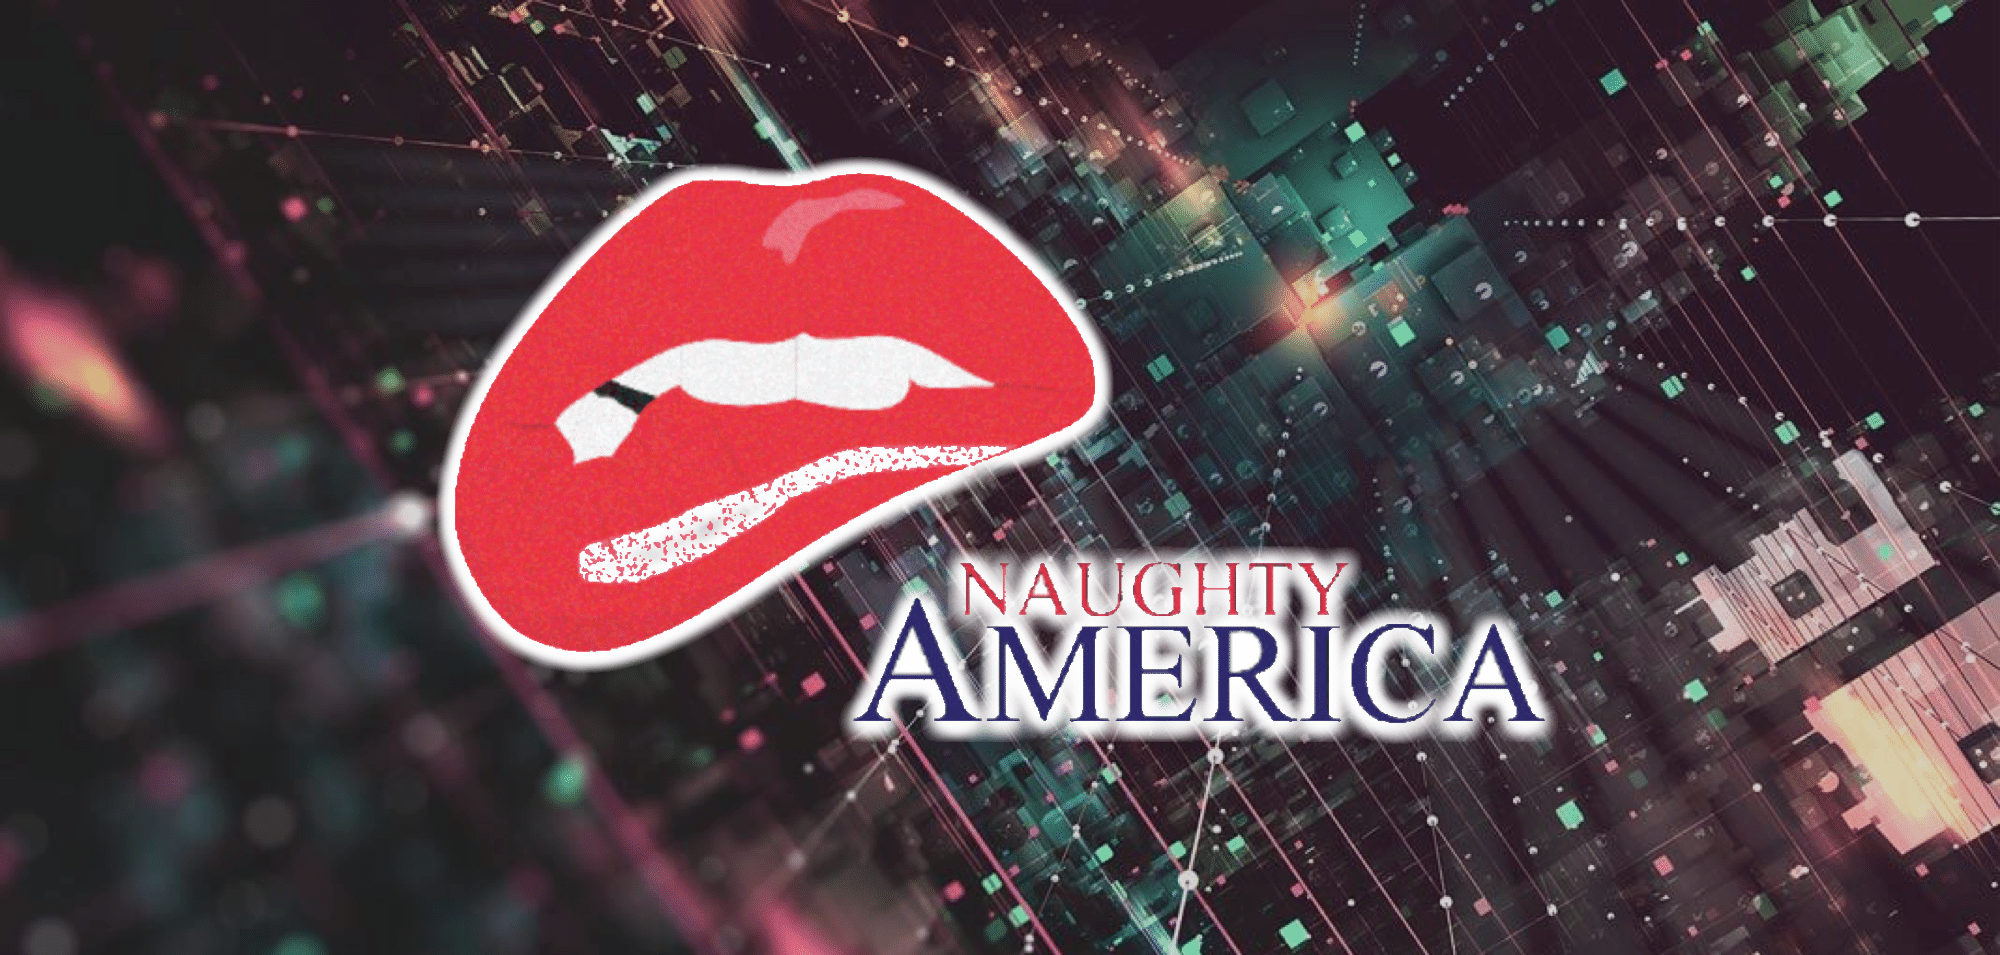 ann marie barton recommends Naughty America Image